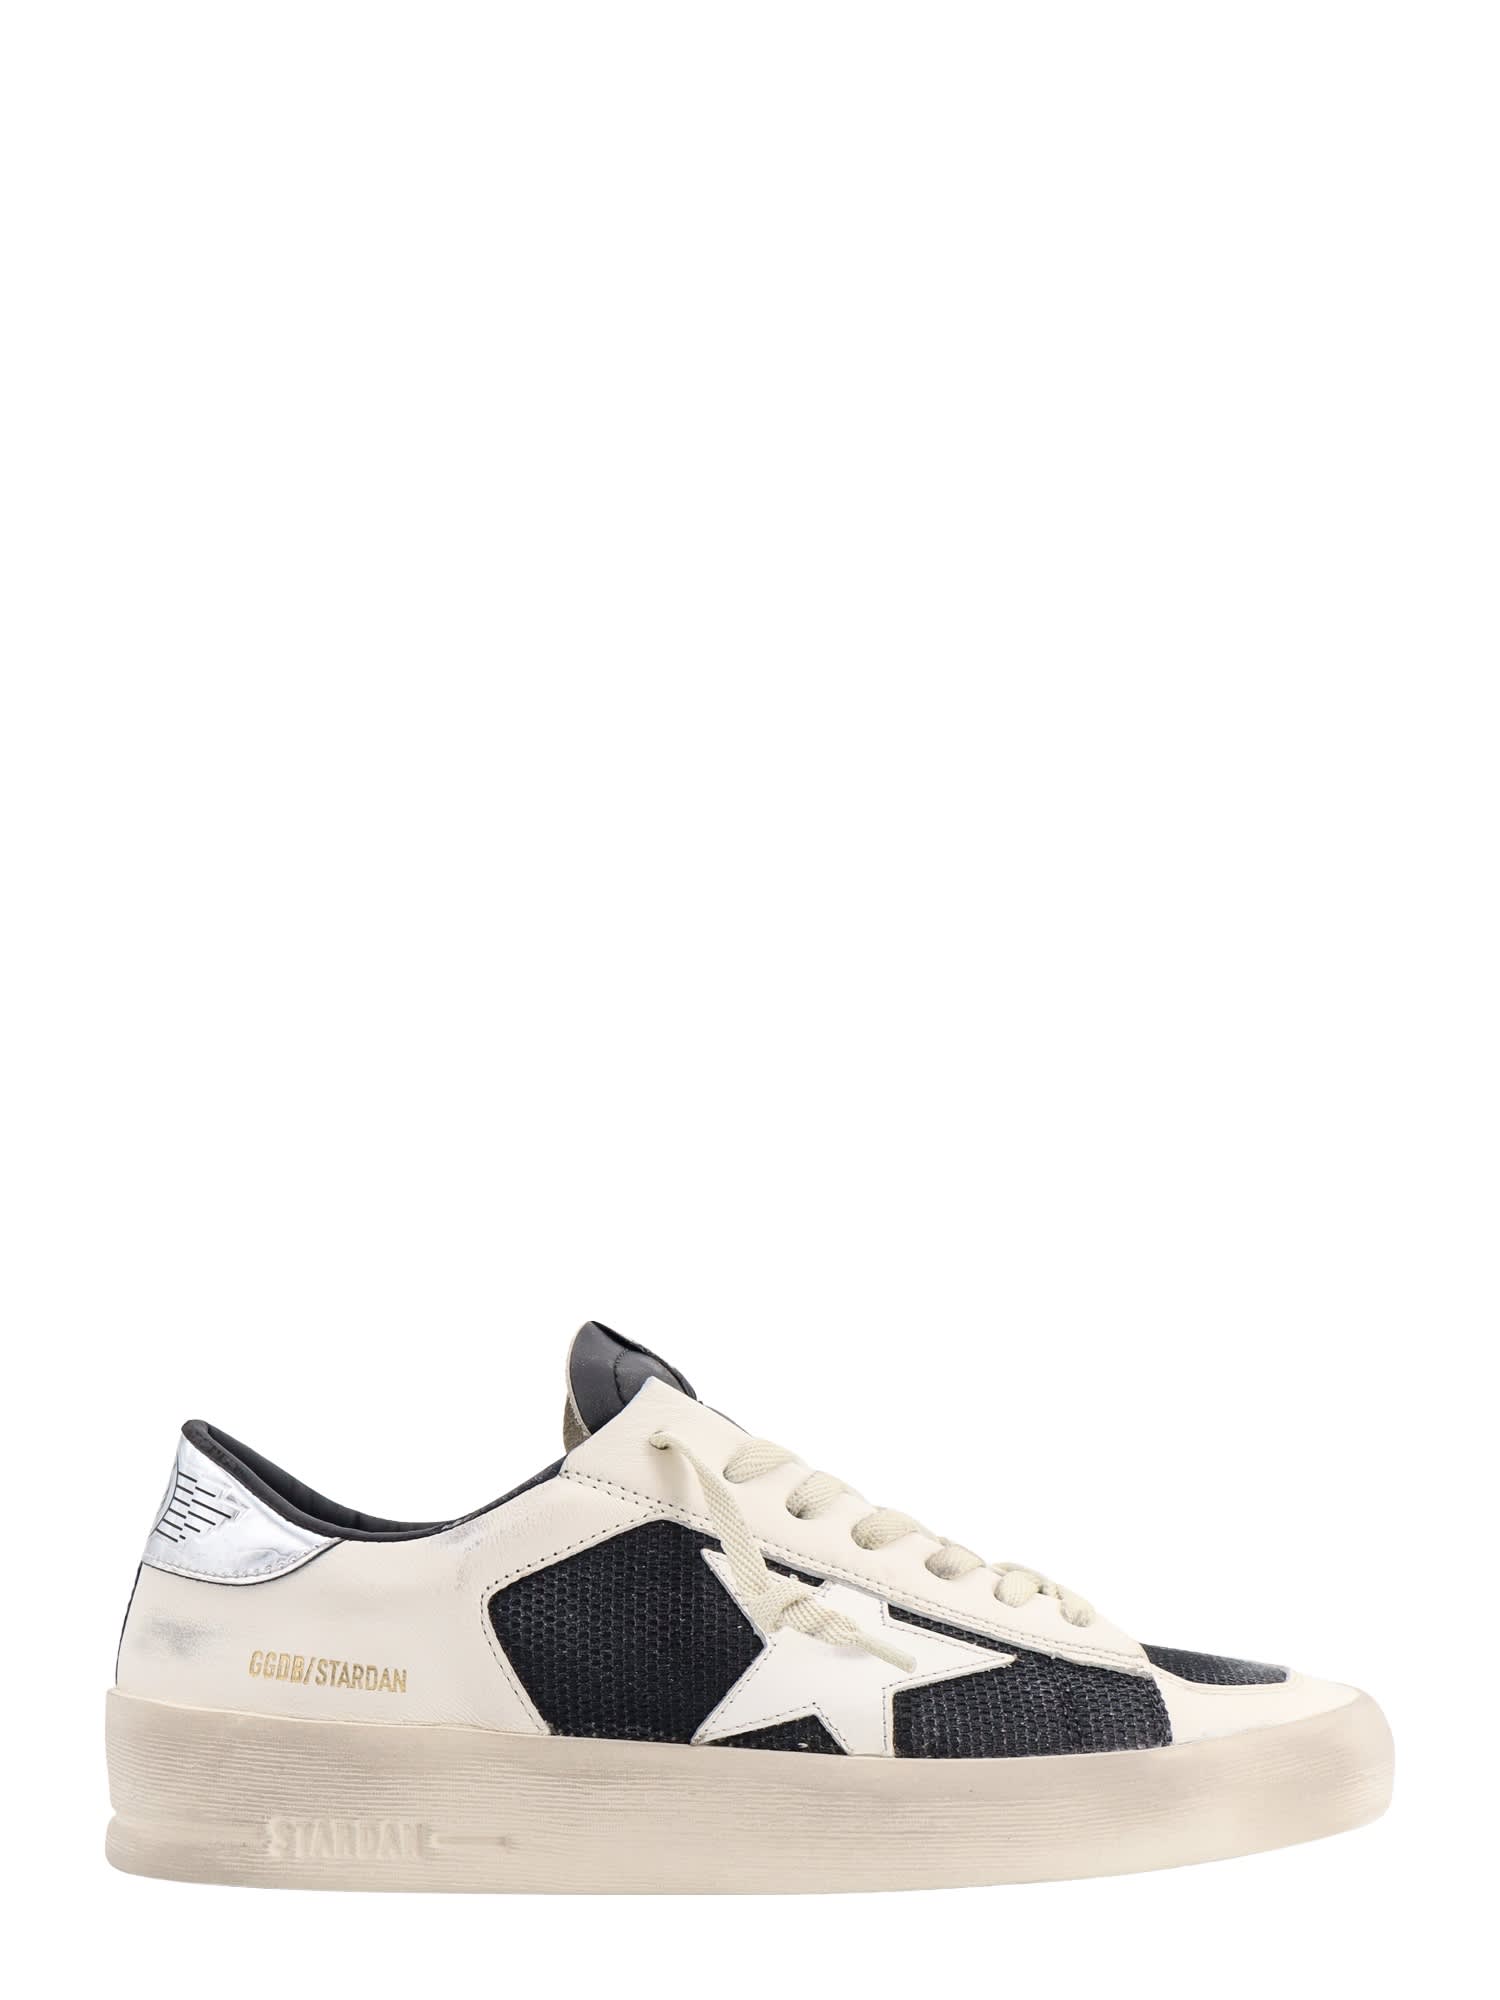 Leather And Mesh Stardan Sneakers